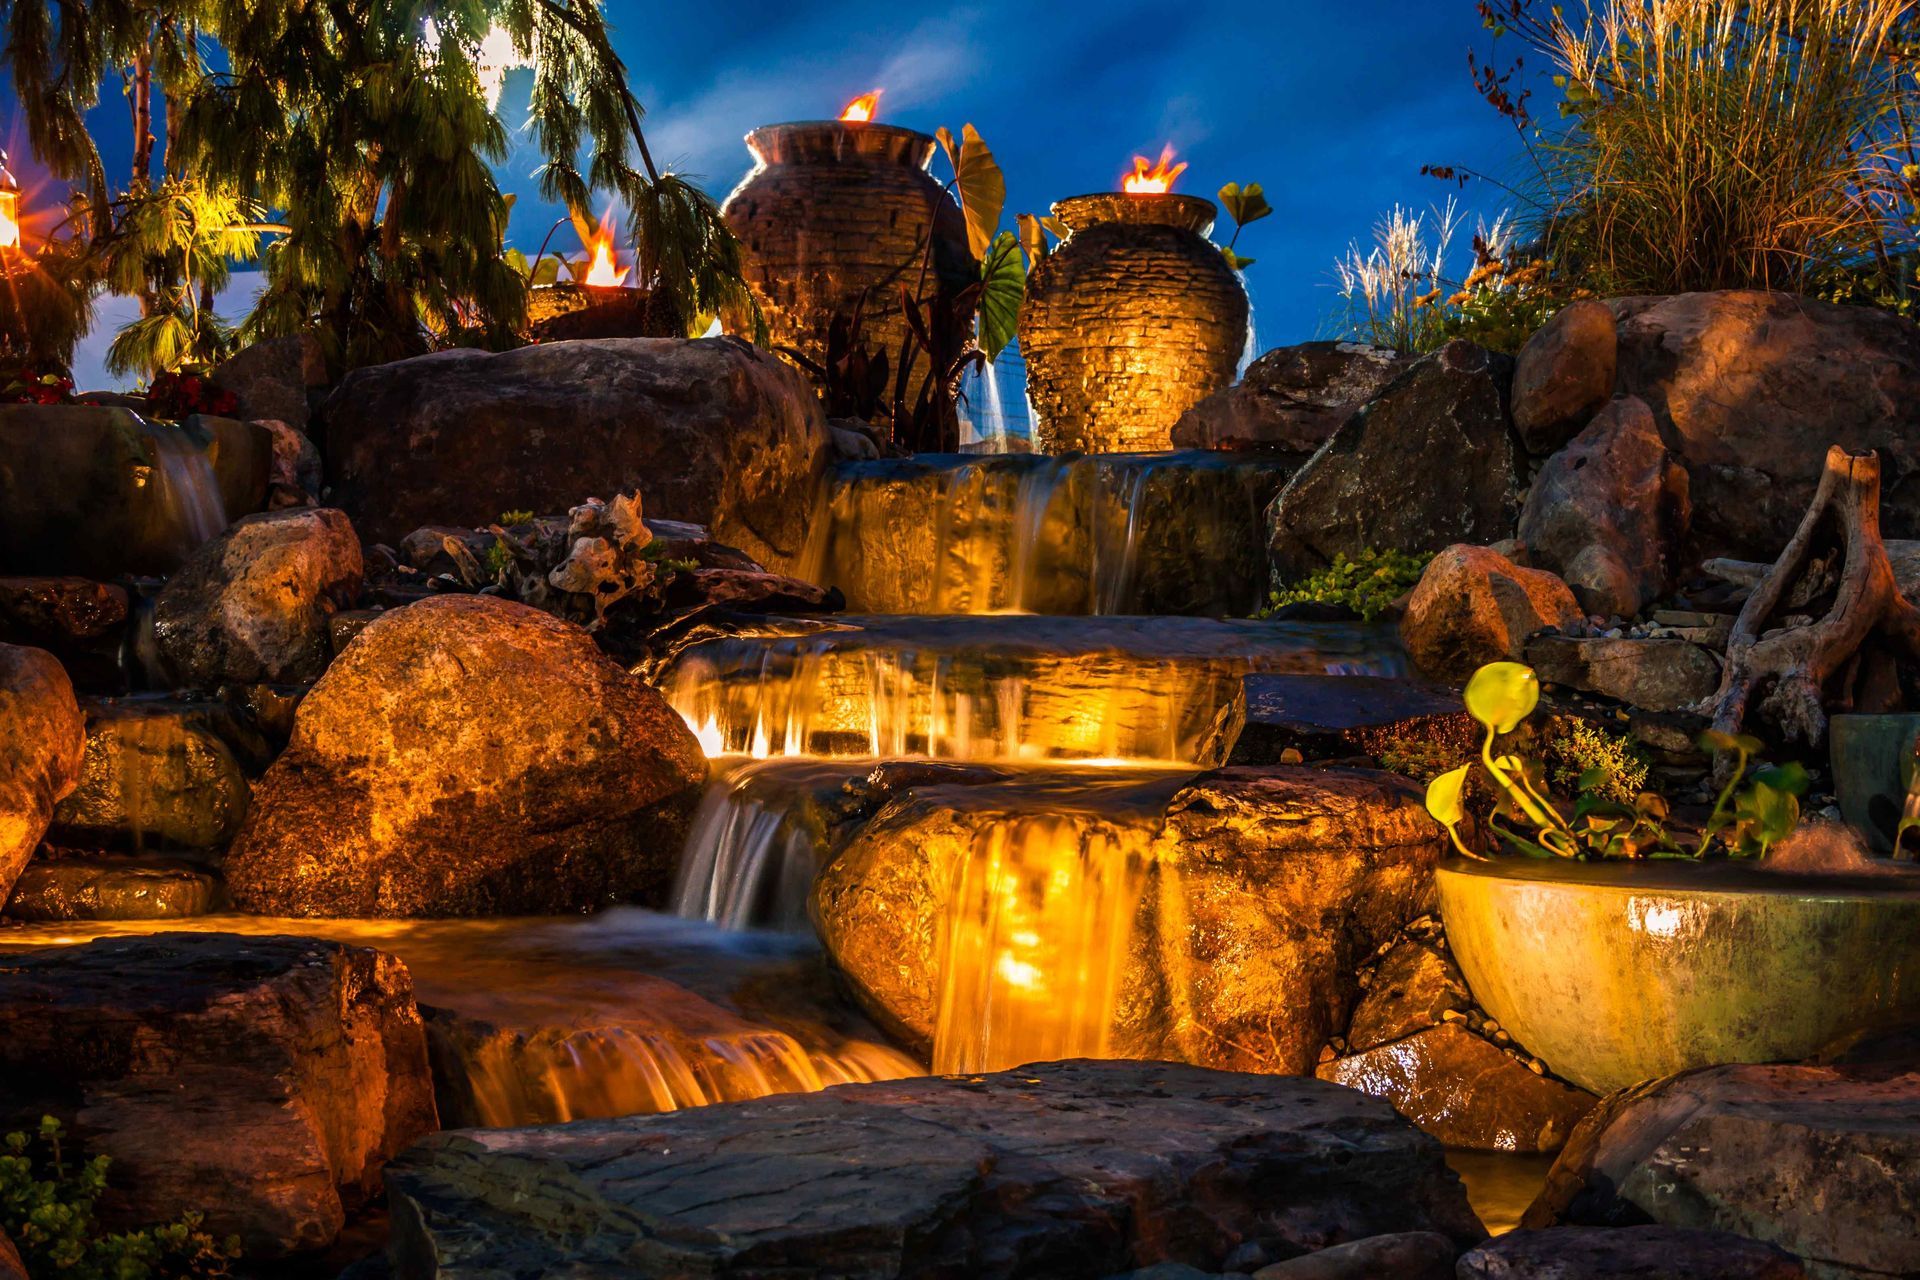 A cascading landscape water feature with ceramic pots and basins illuminated dramatically from below